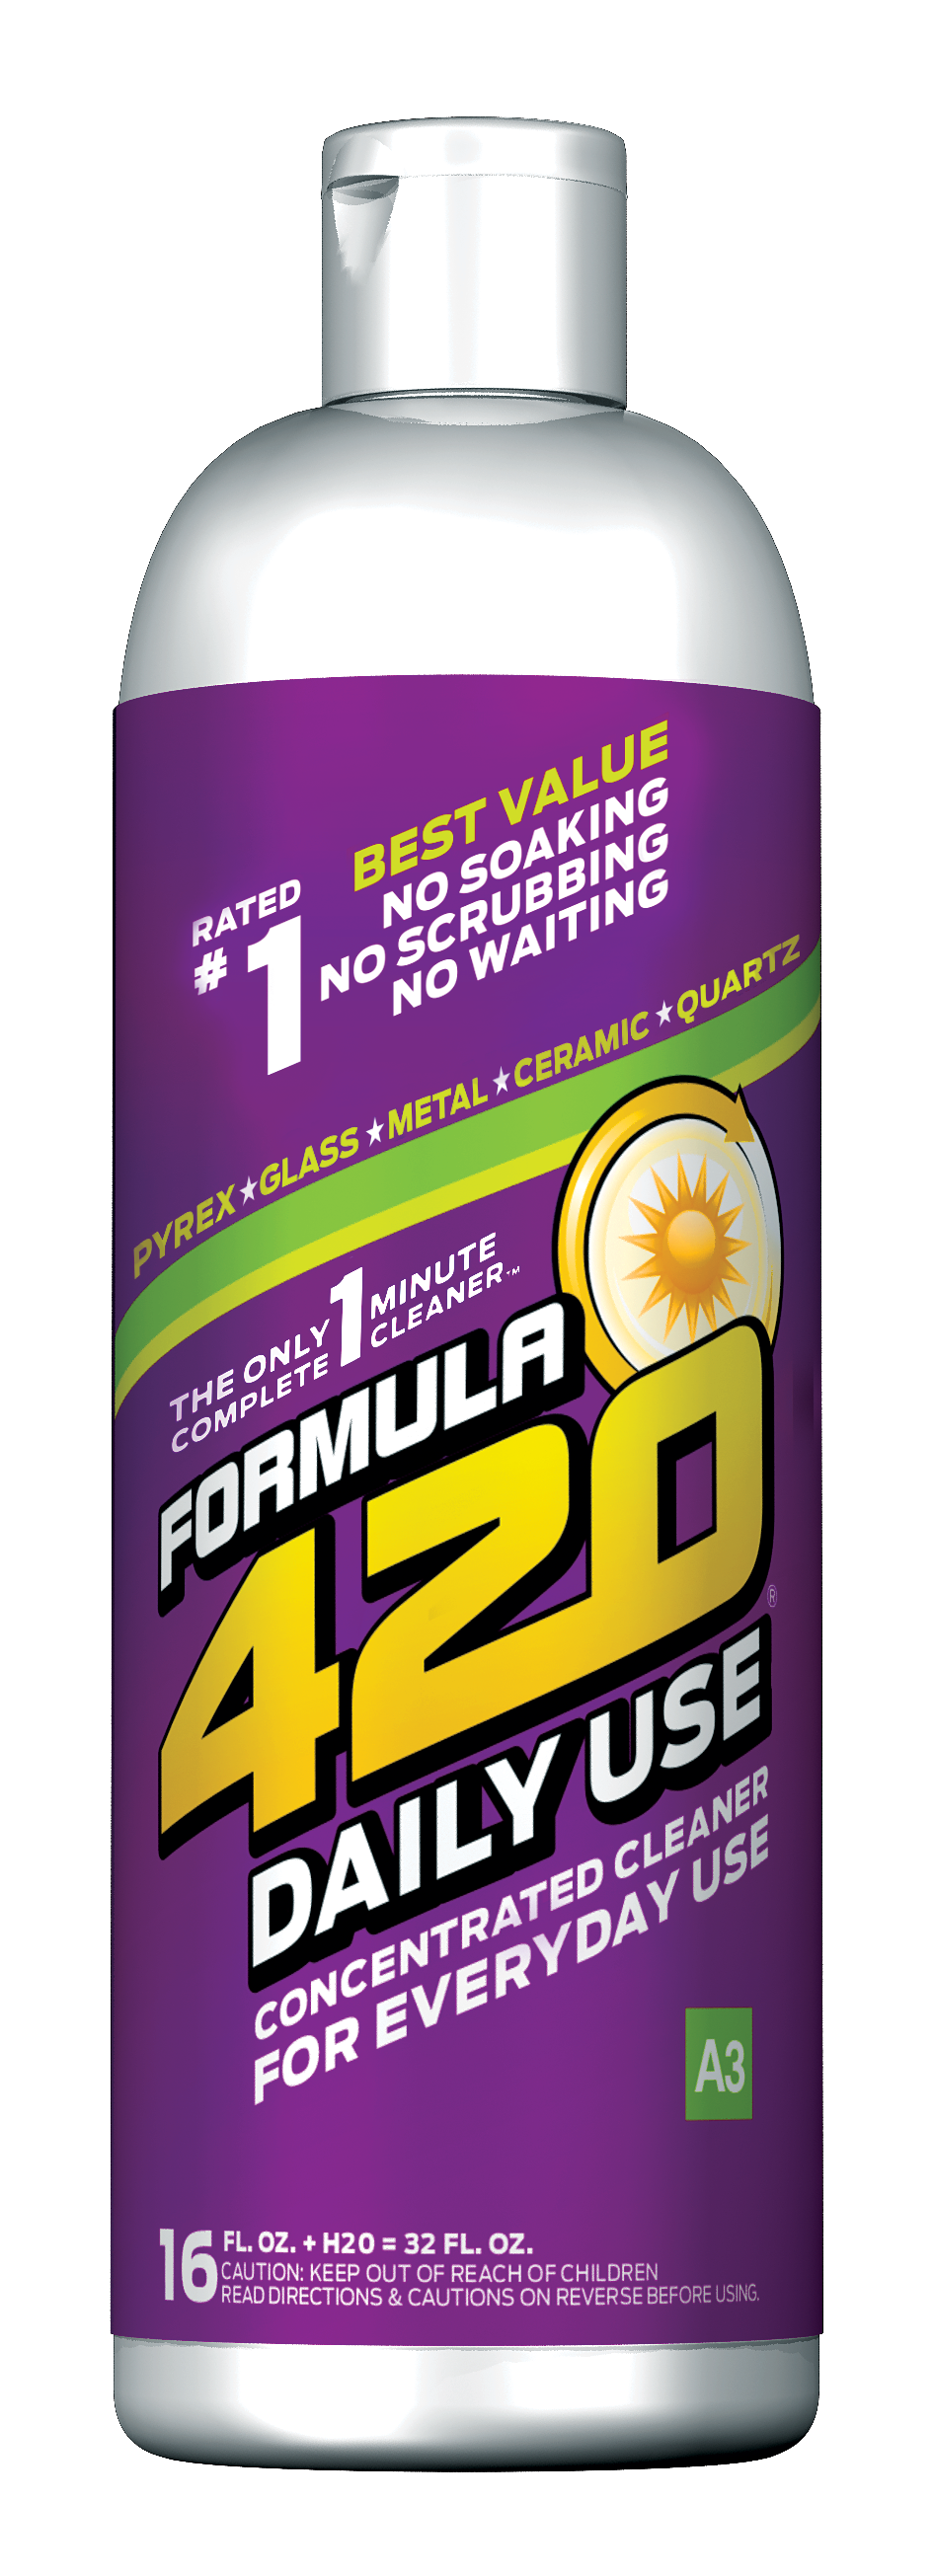 A3 - FORMULA 420 DAILY USE CONCENTRATE (16 Oz) - 20 Units